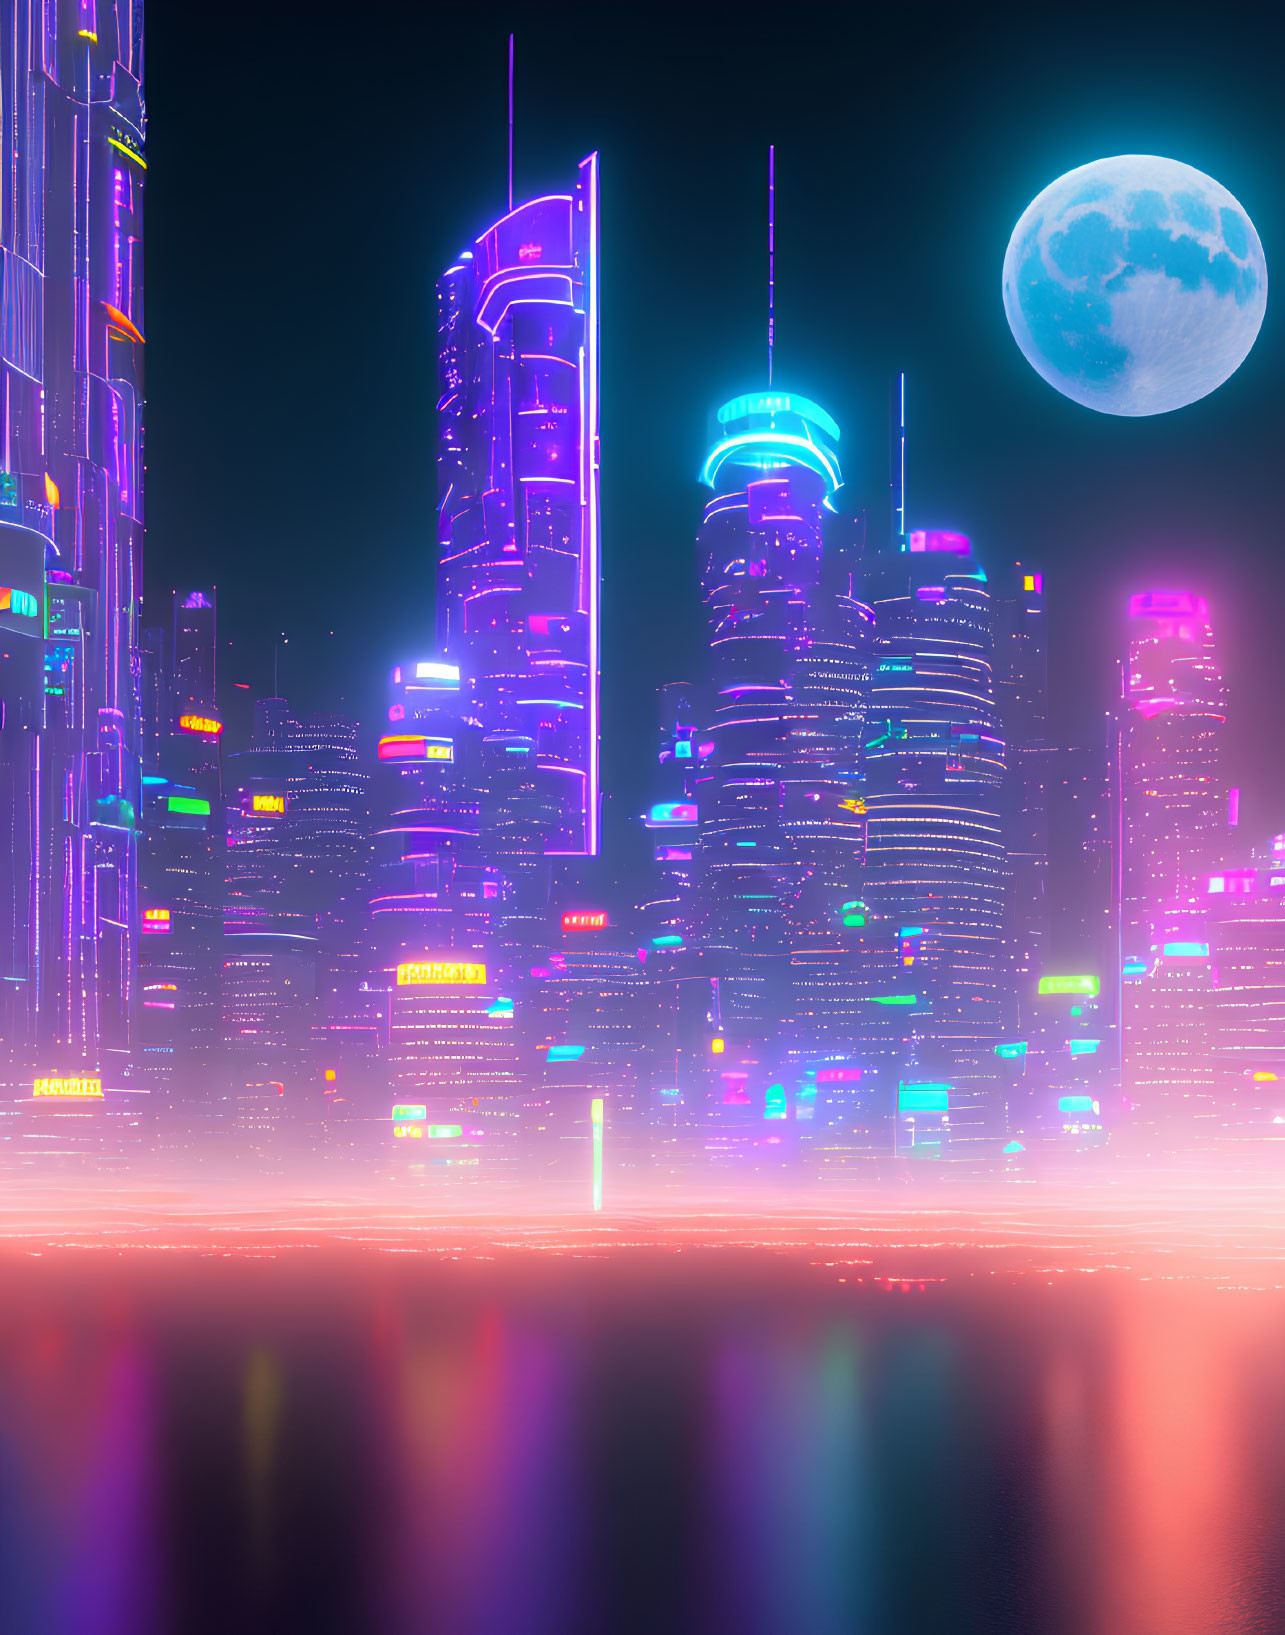 Futuristic cyberpunk cityscape with neon lights and moonlit sky